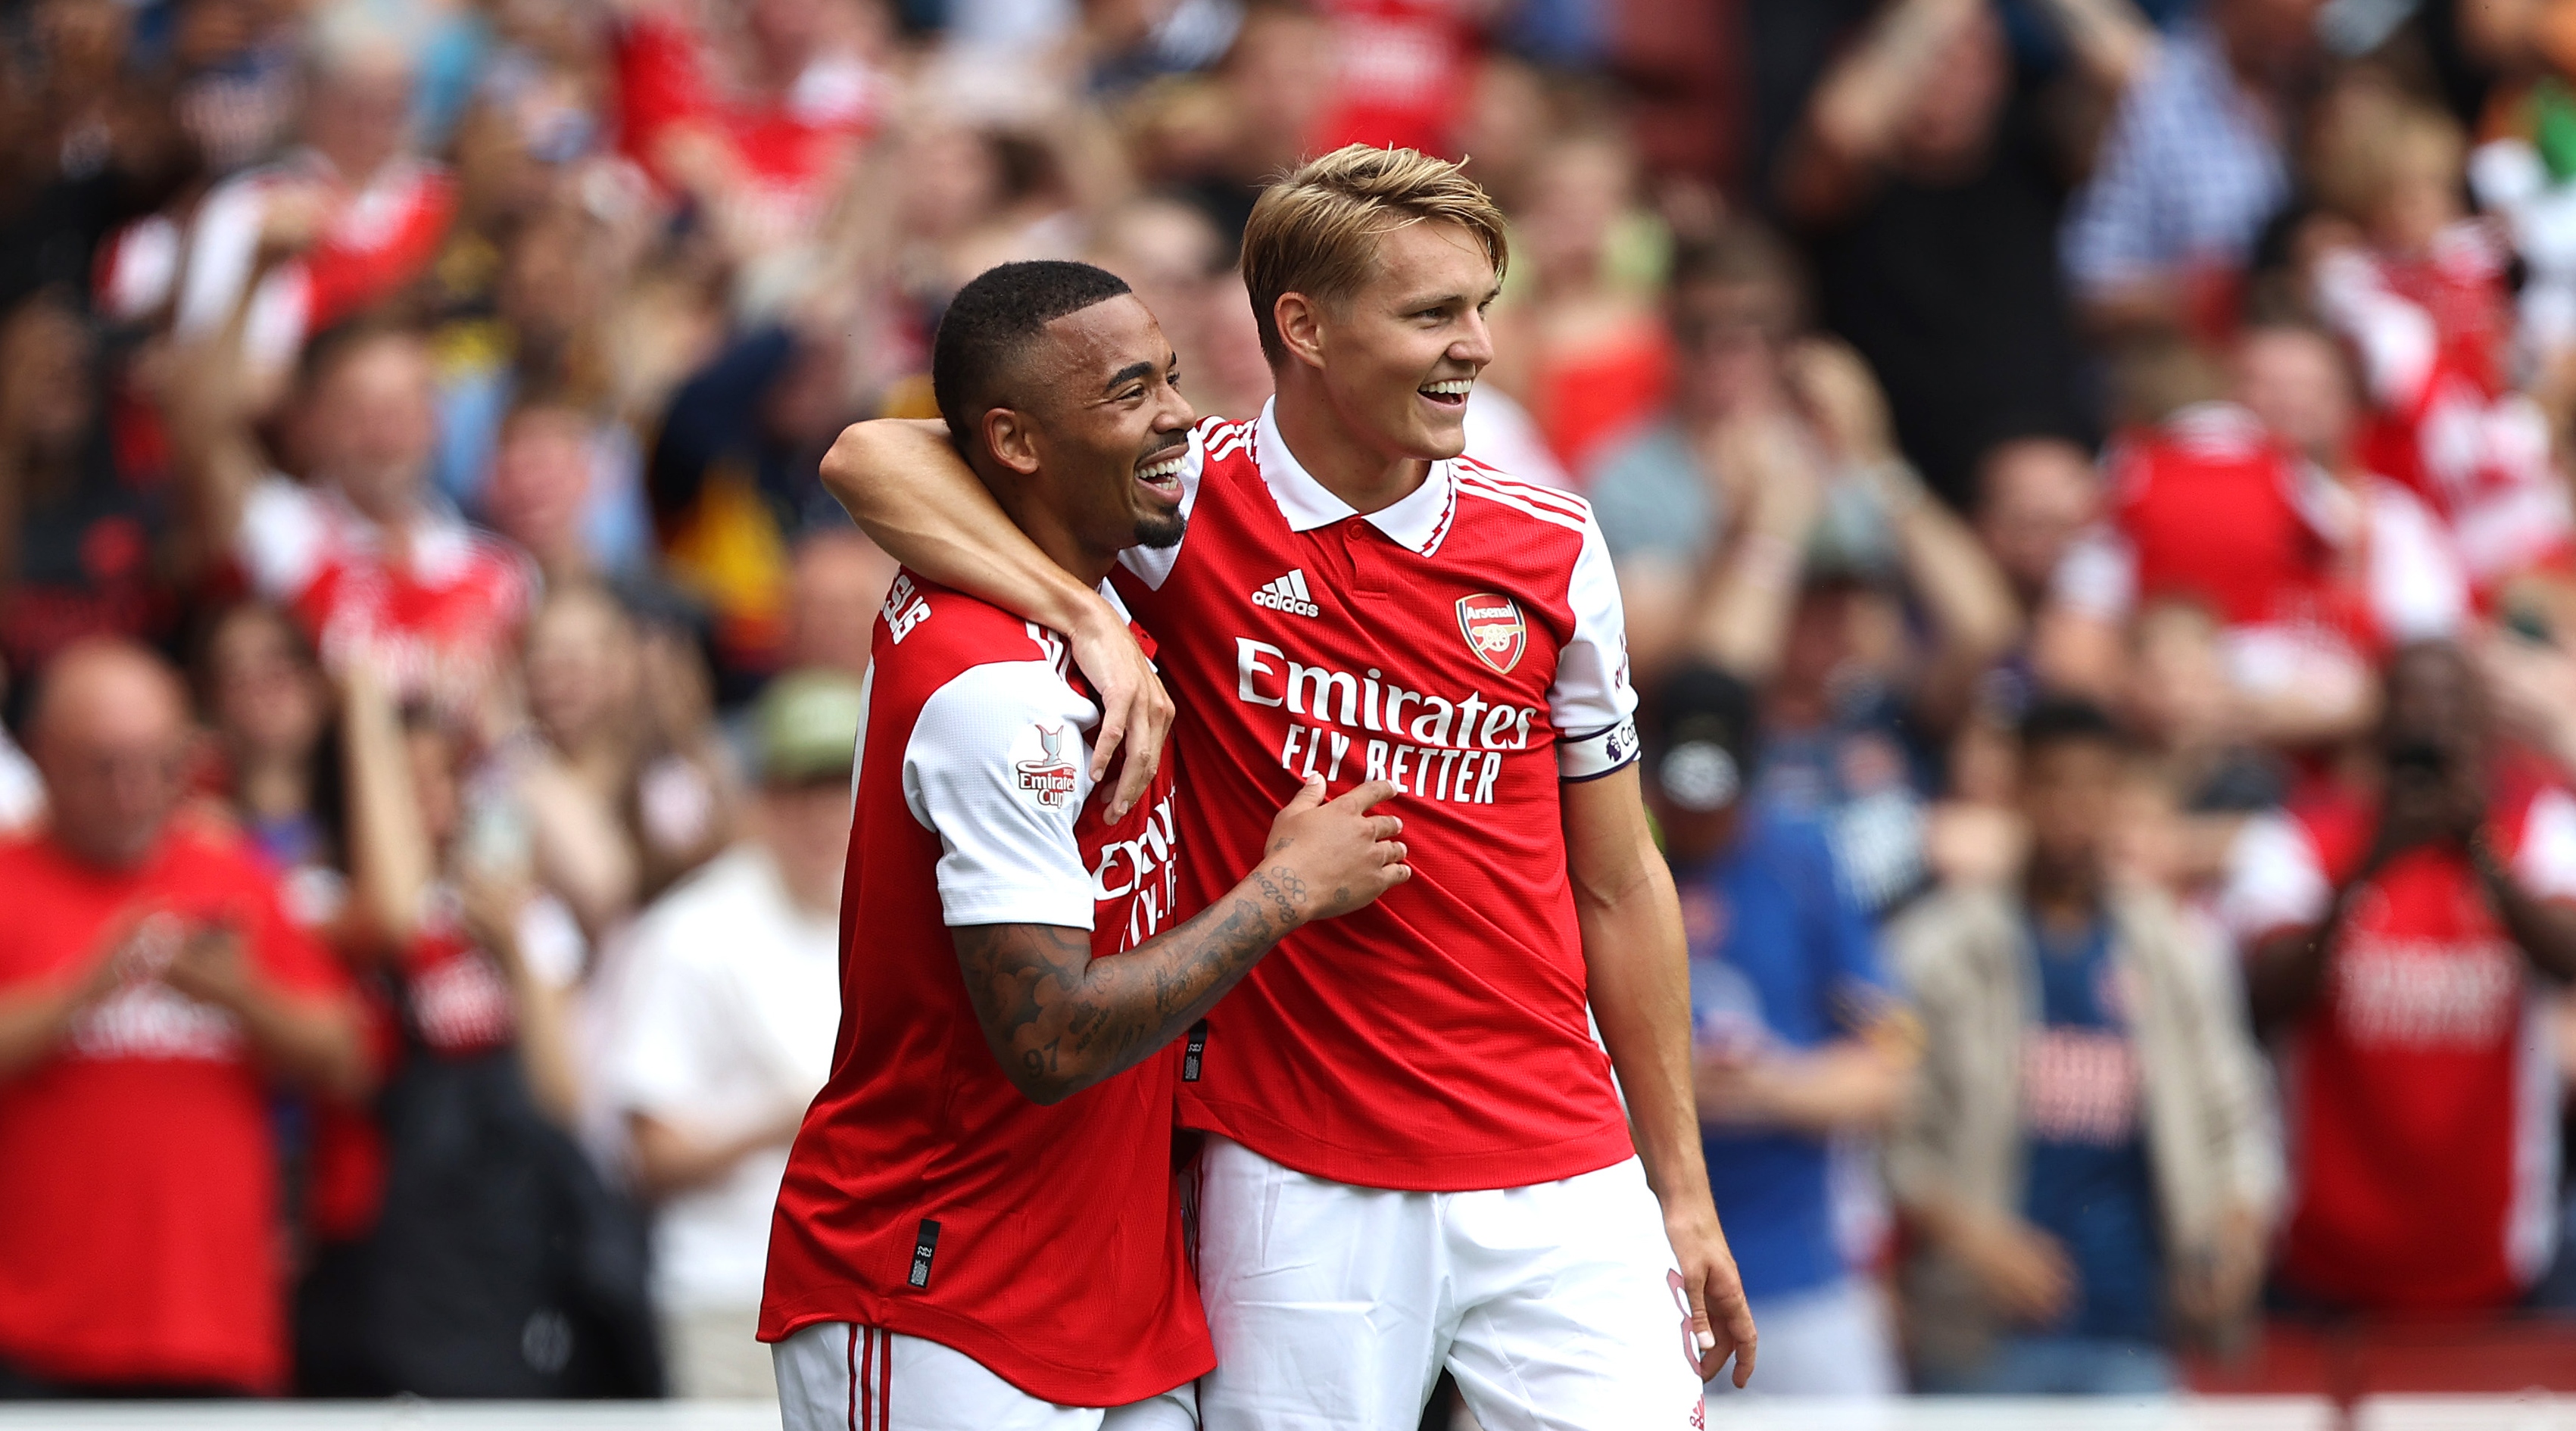 Arsenal vs. Crystal Palace: Date, time, live stream, match preview and how  to watch